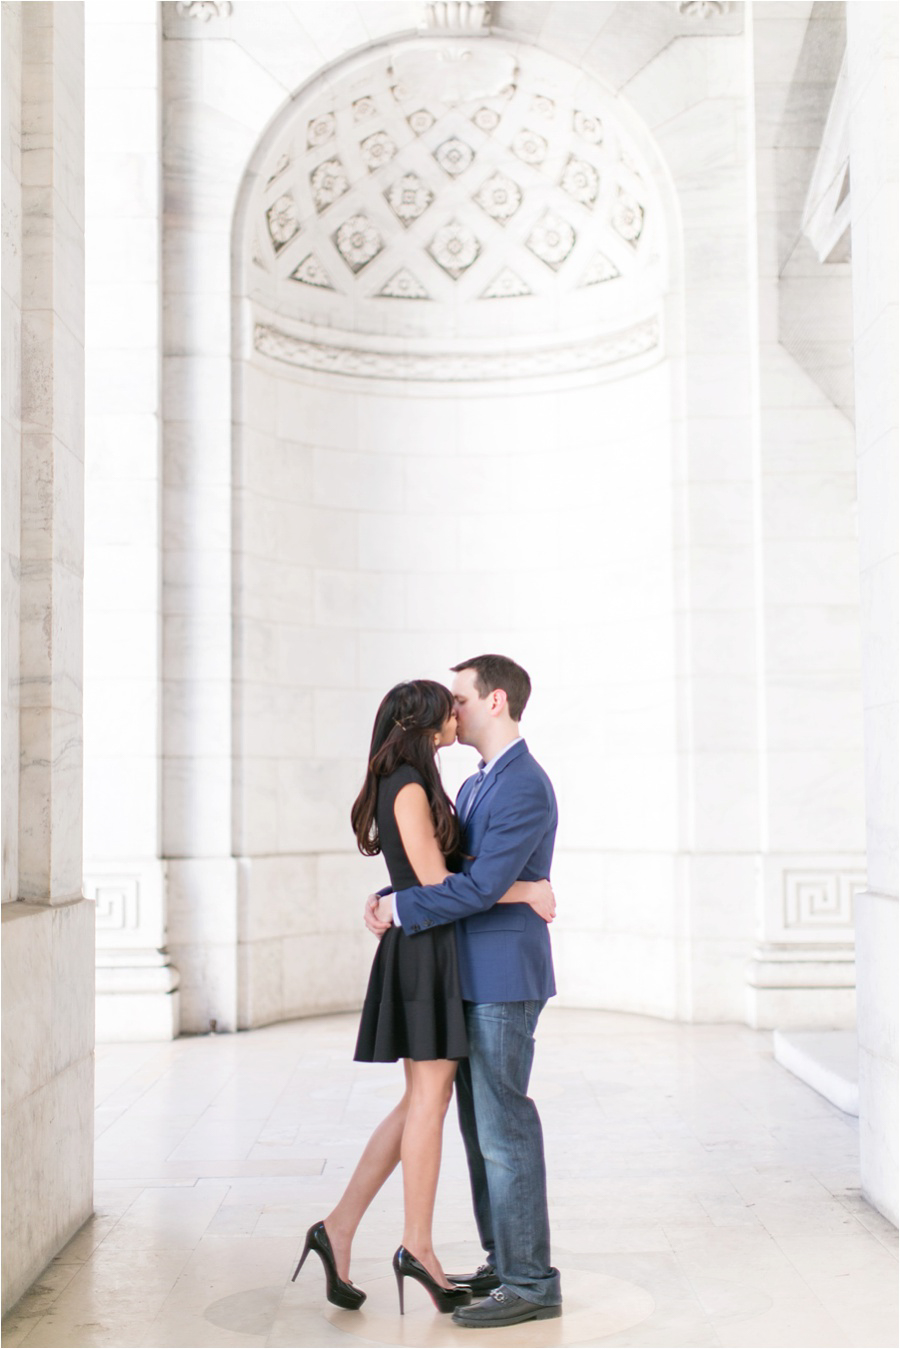 Bryant Park Engagement Photos - Amy Rizzuto Photography-24